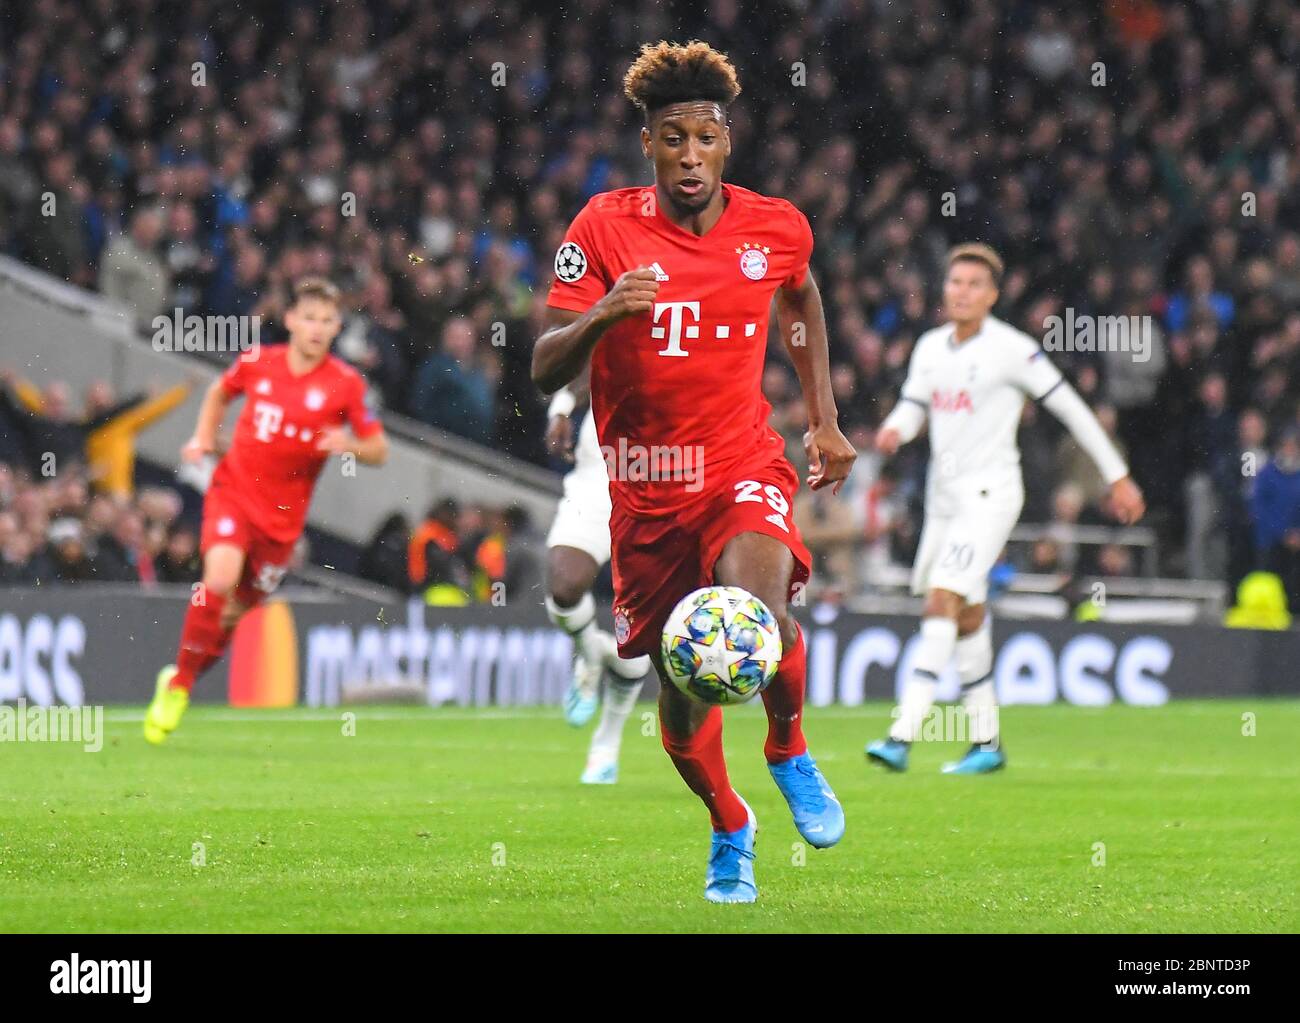 LONDON, ENGLAND - OCTOBER 1, 2019: Kingsley Coman of Bayern pictured during the 2019/20 UEFA Champions League Group B game between Tottenham Hotspur FC (England) and Bayern Munchen (Germany) at Tottenham Hotspur Stadium. Stock Photo